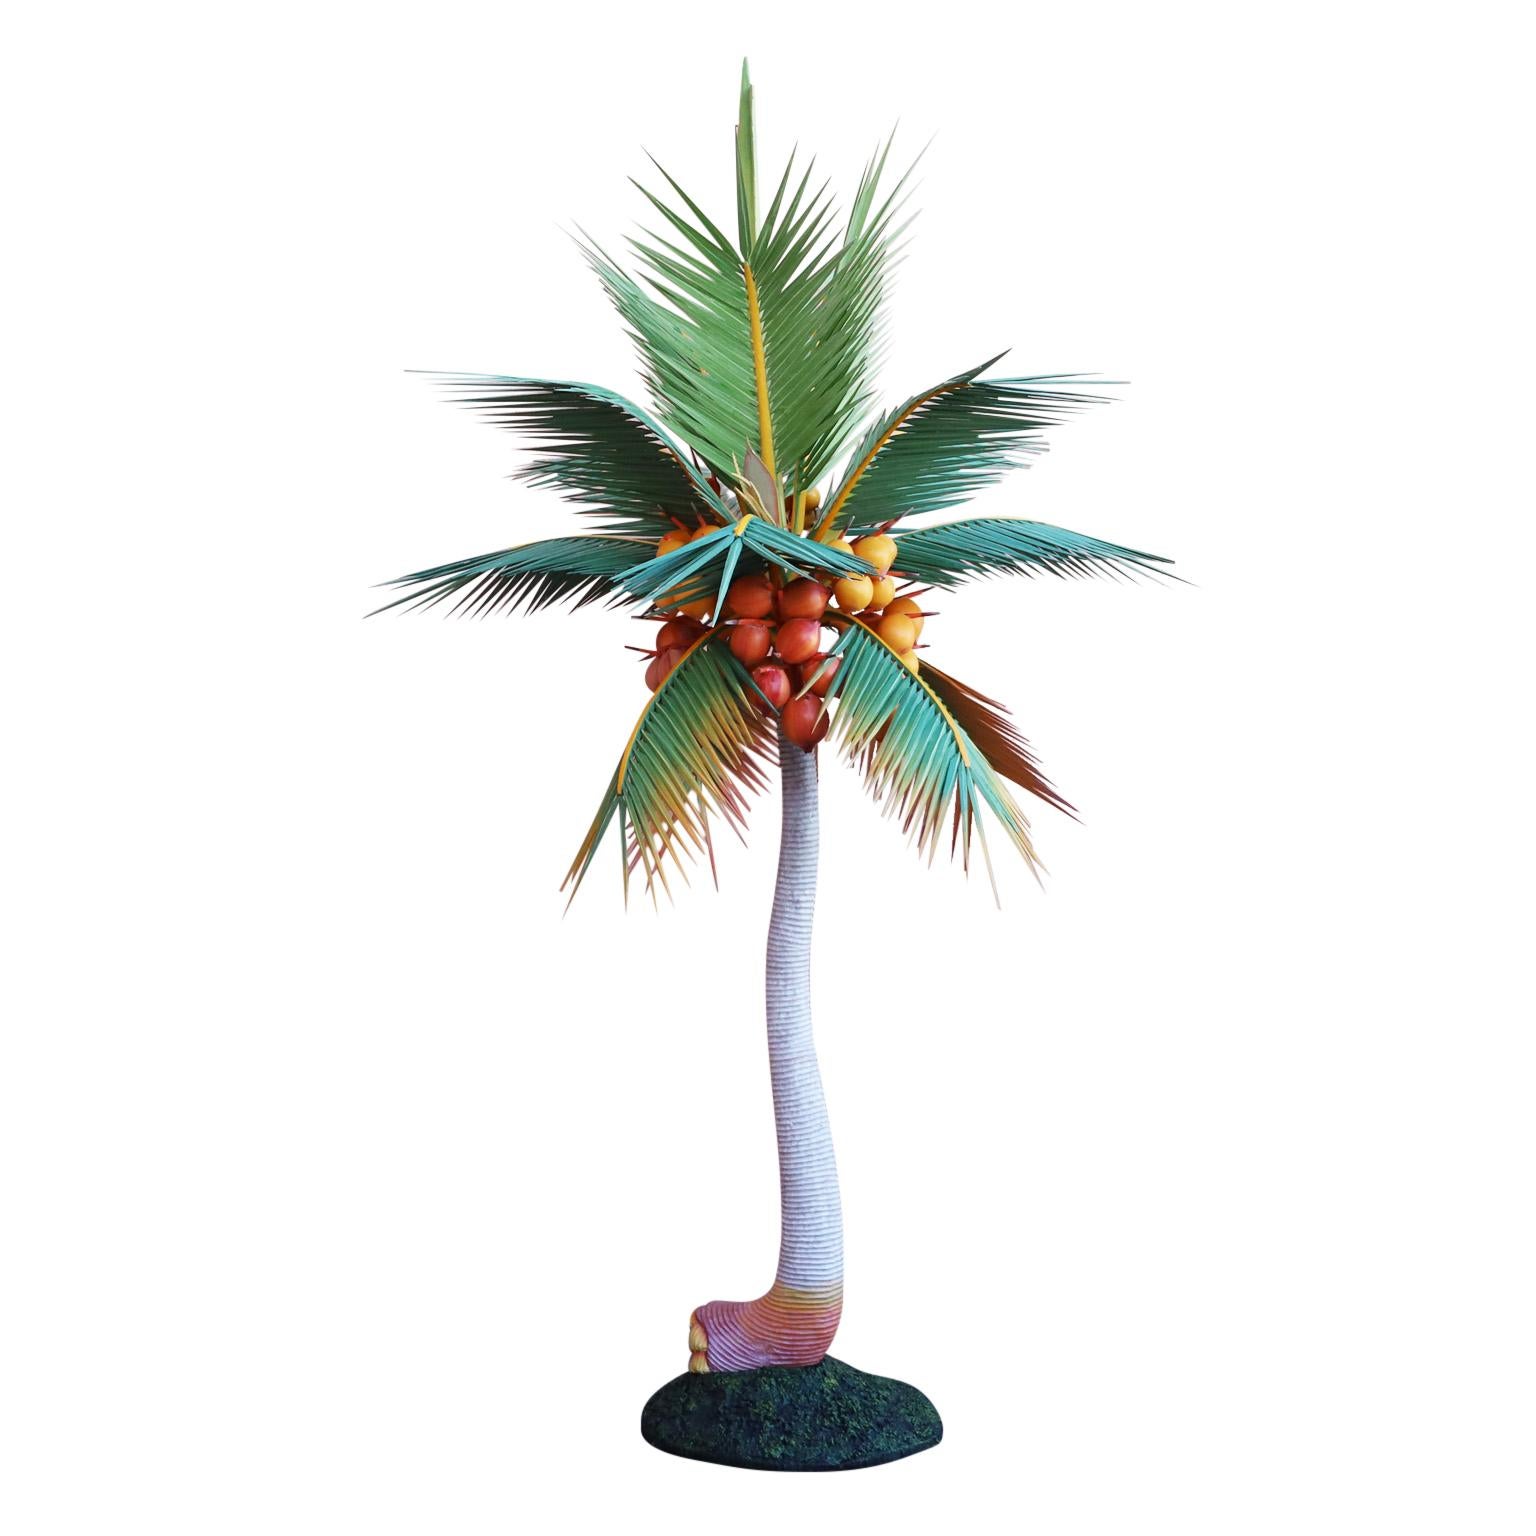 Extraordinary tall vintage palm tree sculpture handcrafted in wood carved and paint decorated with leaves, coconuts, trunk, and weighted terra firma base.